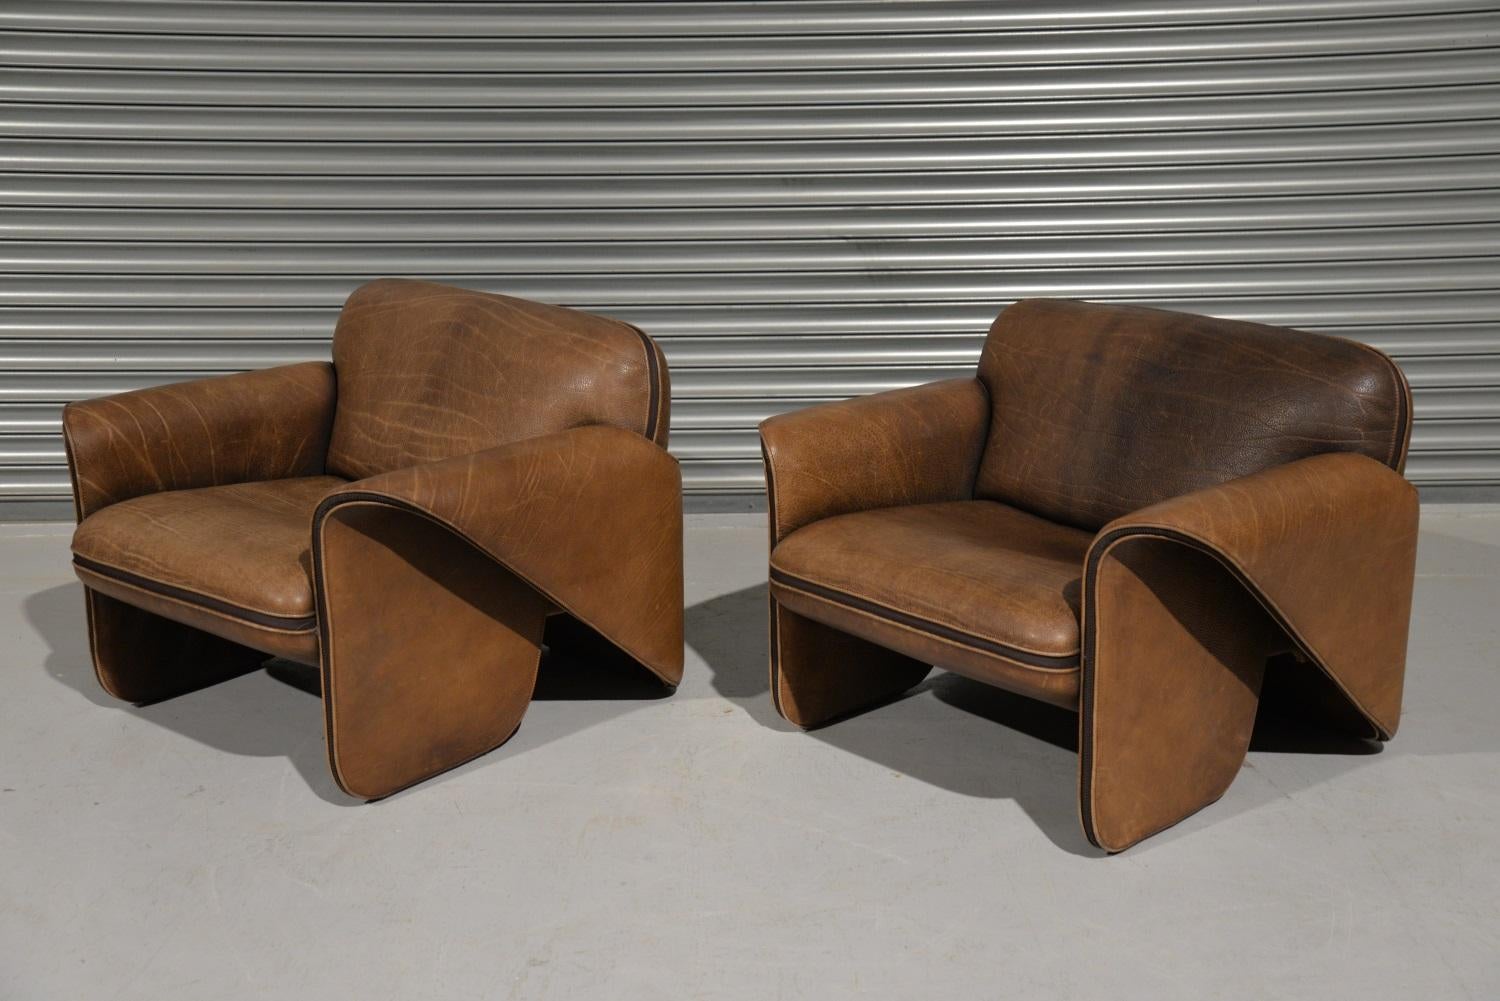 Discounted airfreight for our International customers (from 2 weeks door to door)

Ultra rare pair of vintage De Sede DS 125 armchair by Gerd Lange in 1978. Hand built by de Sede craftsman in Switzerland, these sculptural pieces are upholstered in